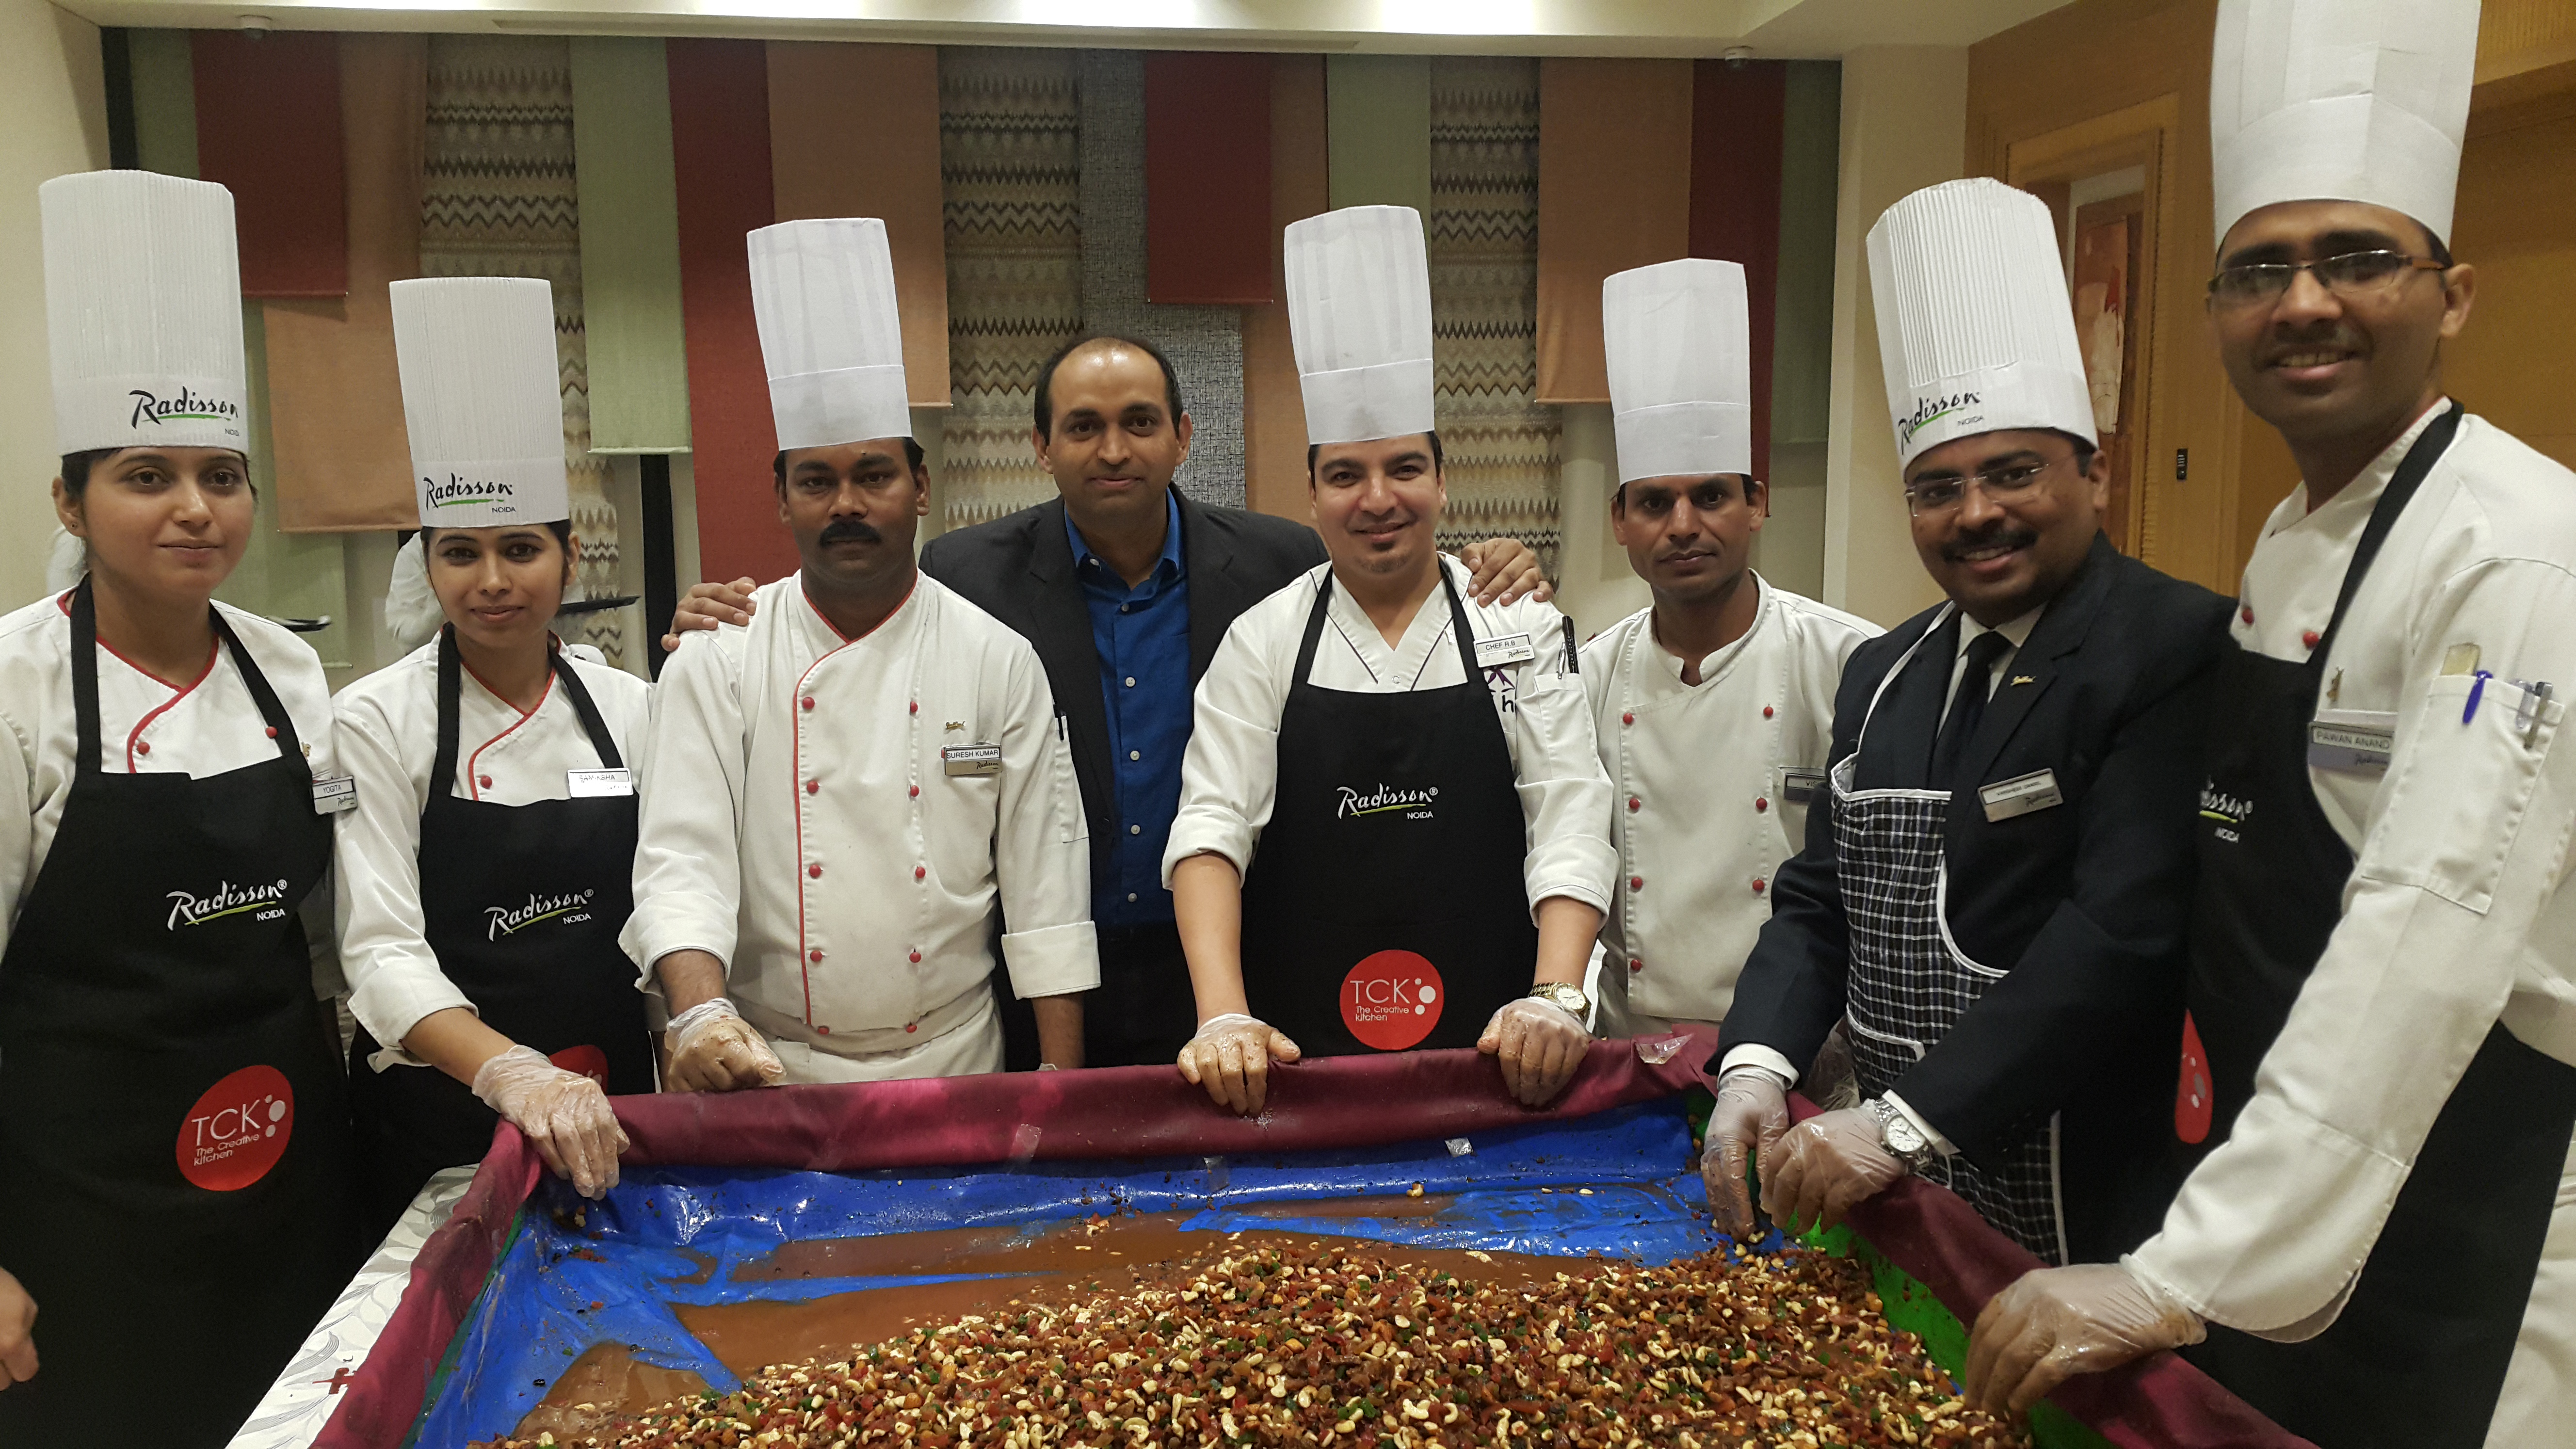 Read more about the article RADISSON NOIDA WELCOMES THE YULETIDE WITH THE ANNUAL CAKE MIXING CEREMONY